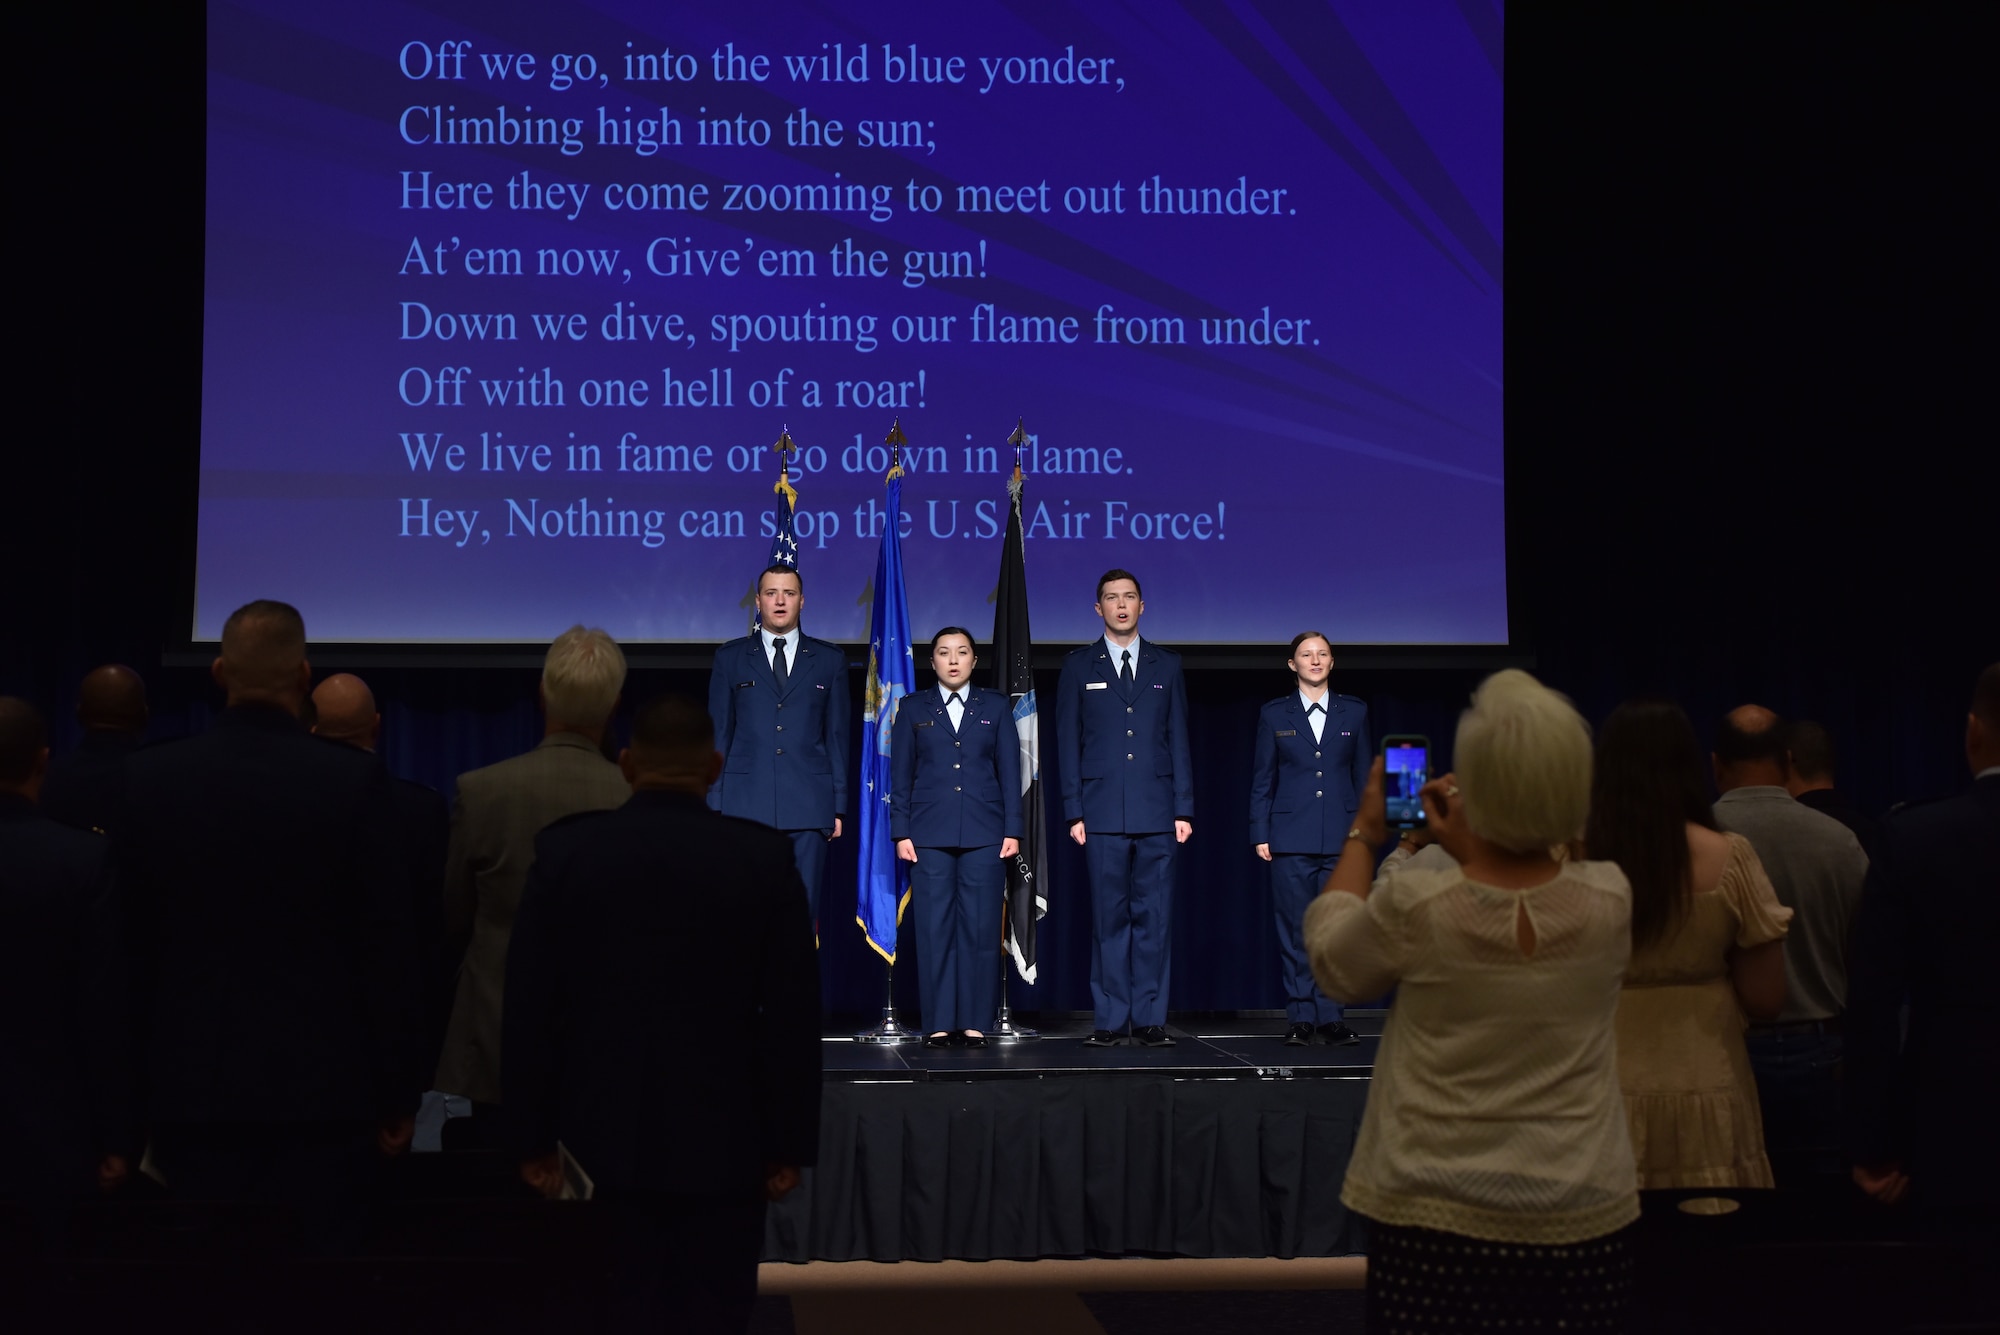 Newly commissioned U.S. Air Force and Space Force officers sing the Air Force song at Angelo State University, San Angelo, Texas, May 12, 2023. The new officers closed the ceremony by leading the crowd in song. (U.S. Air Force photo by Airman 1st Class Madison Collier)